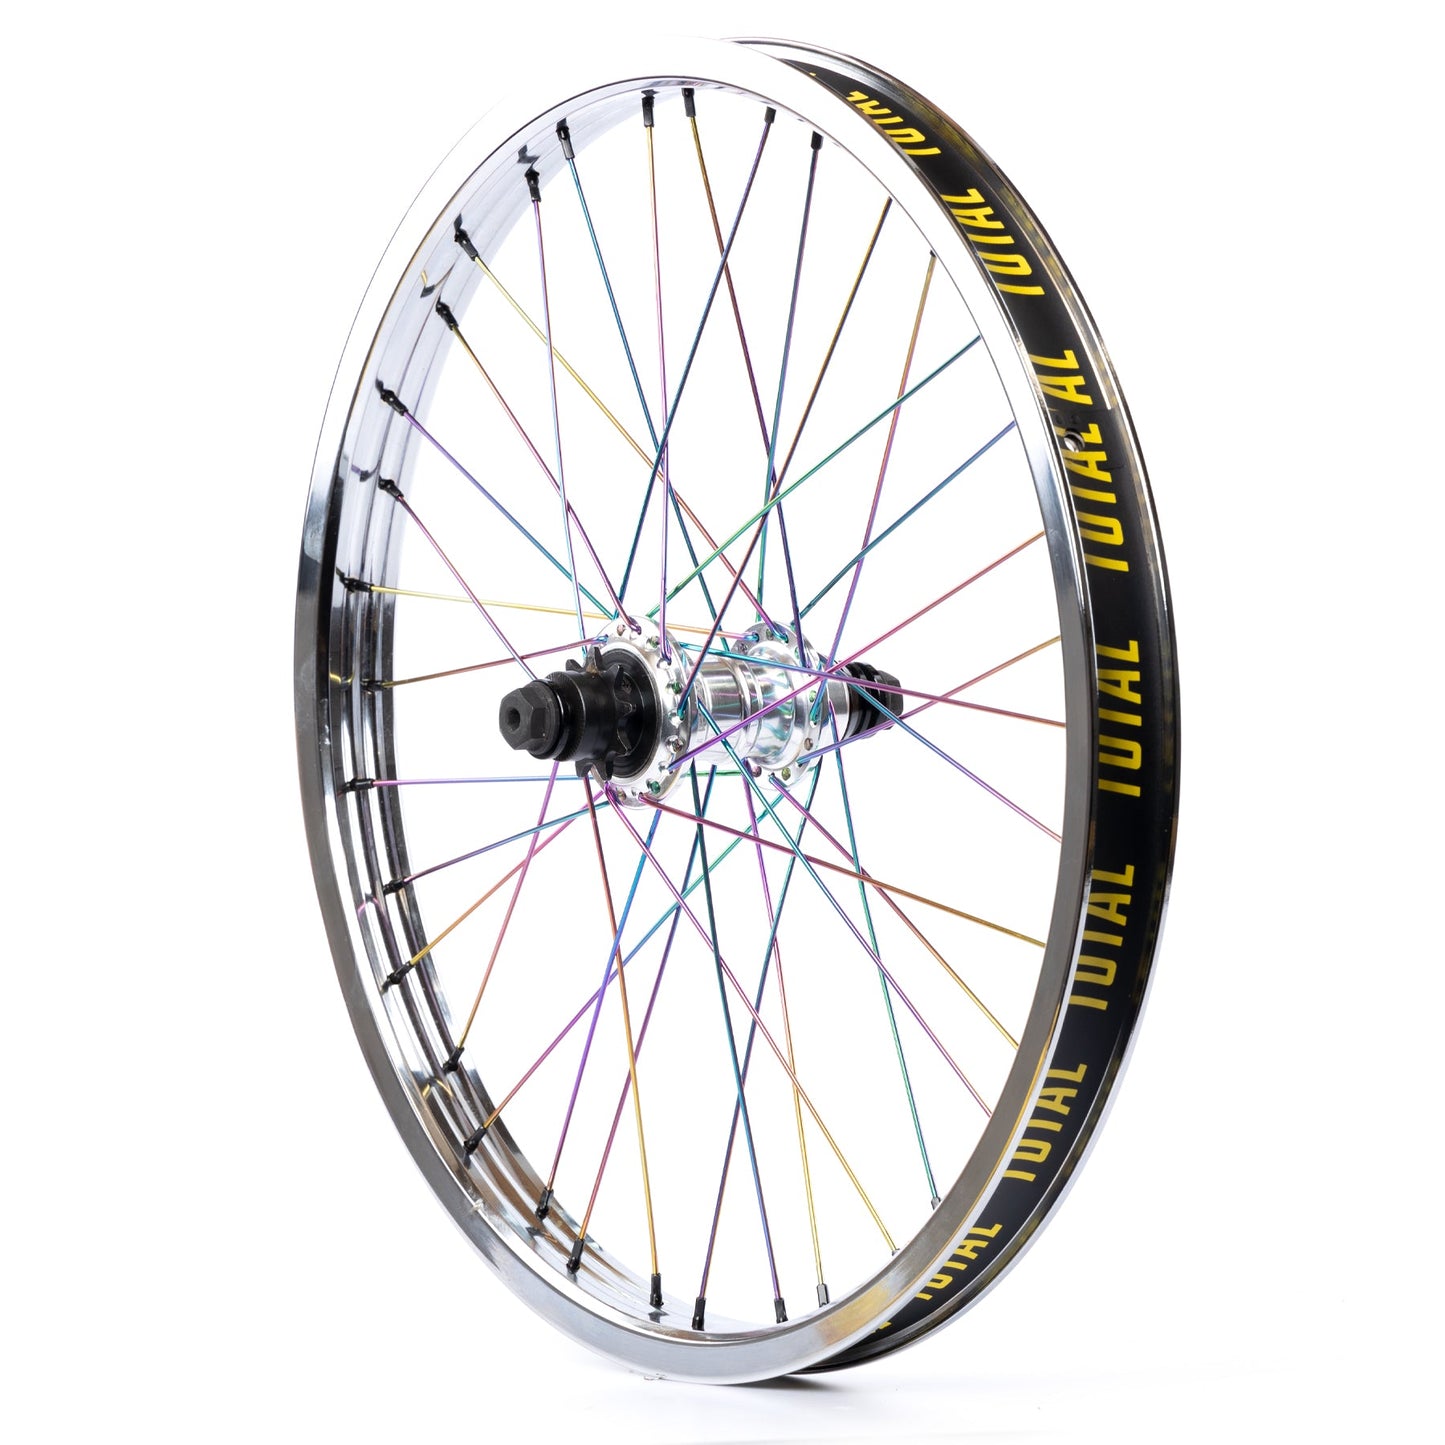 Total BMX Techfire Cassette Rear Wheel - Chrome With Rainbow Spokes 9 Tooth